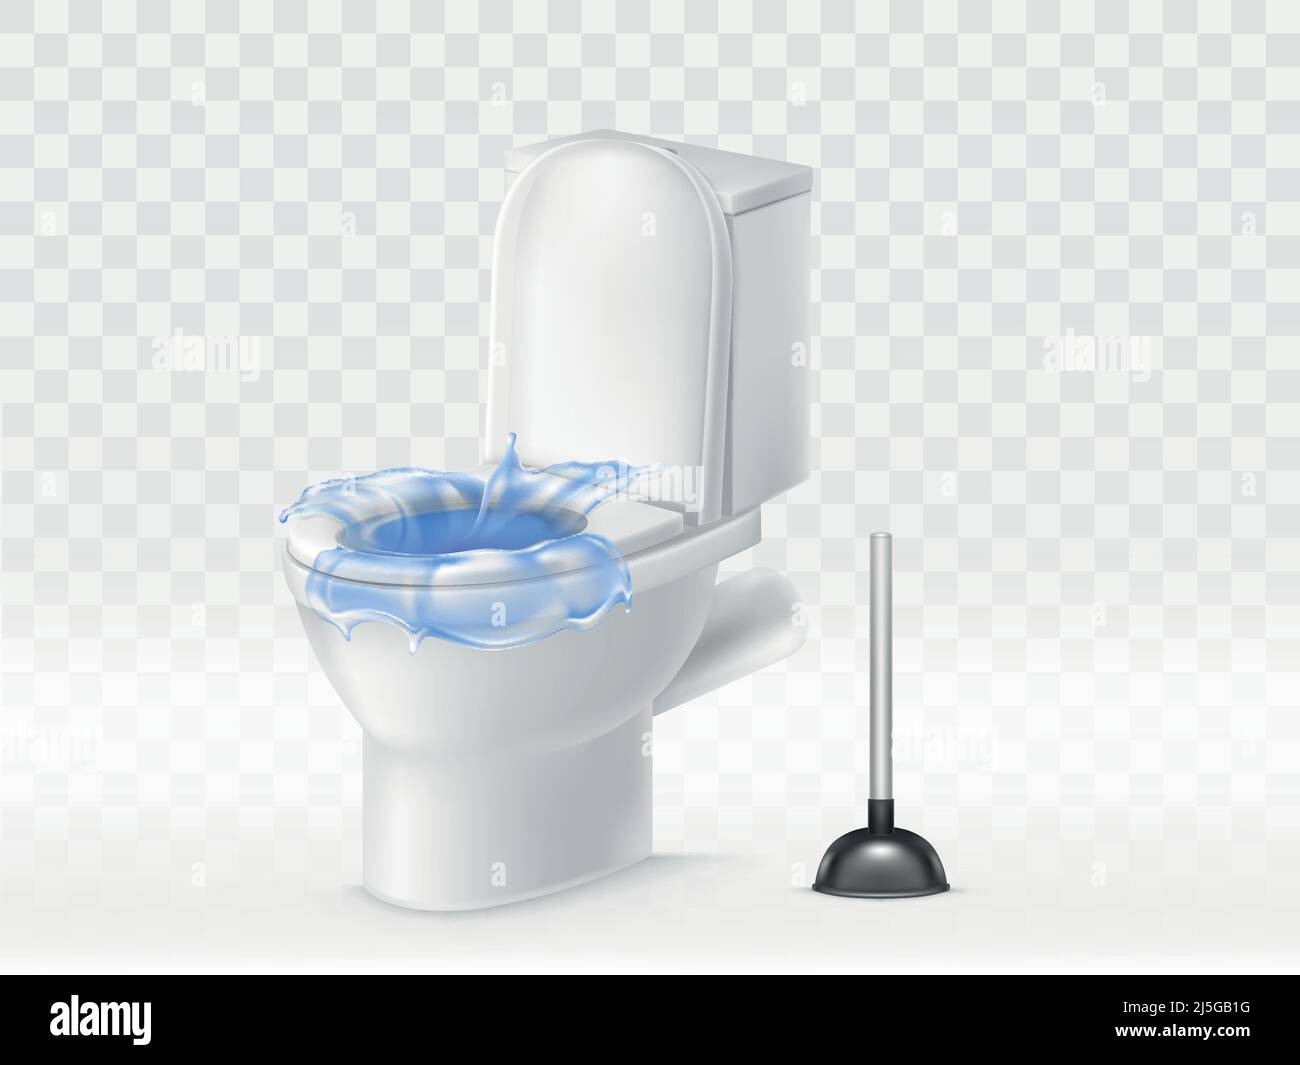 Vector 3d realistic clogged toilet bowl full of water. Plunger made clearing of wc. Splashing, flushing of blue liquid. Lavatory, closet object isolat Stock Vector